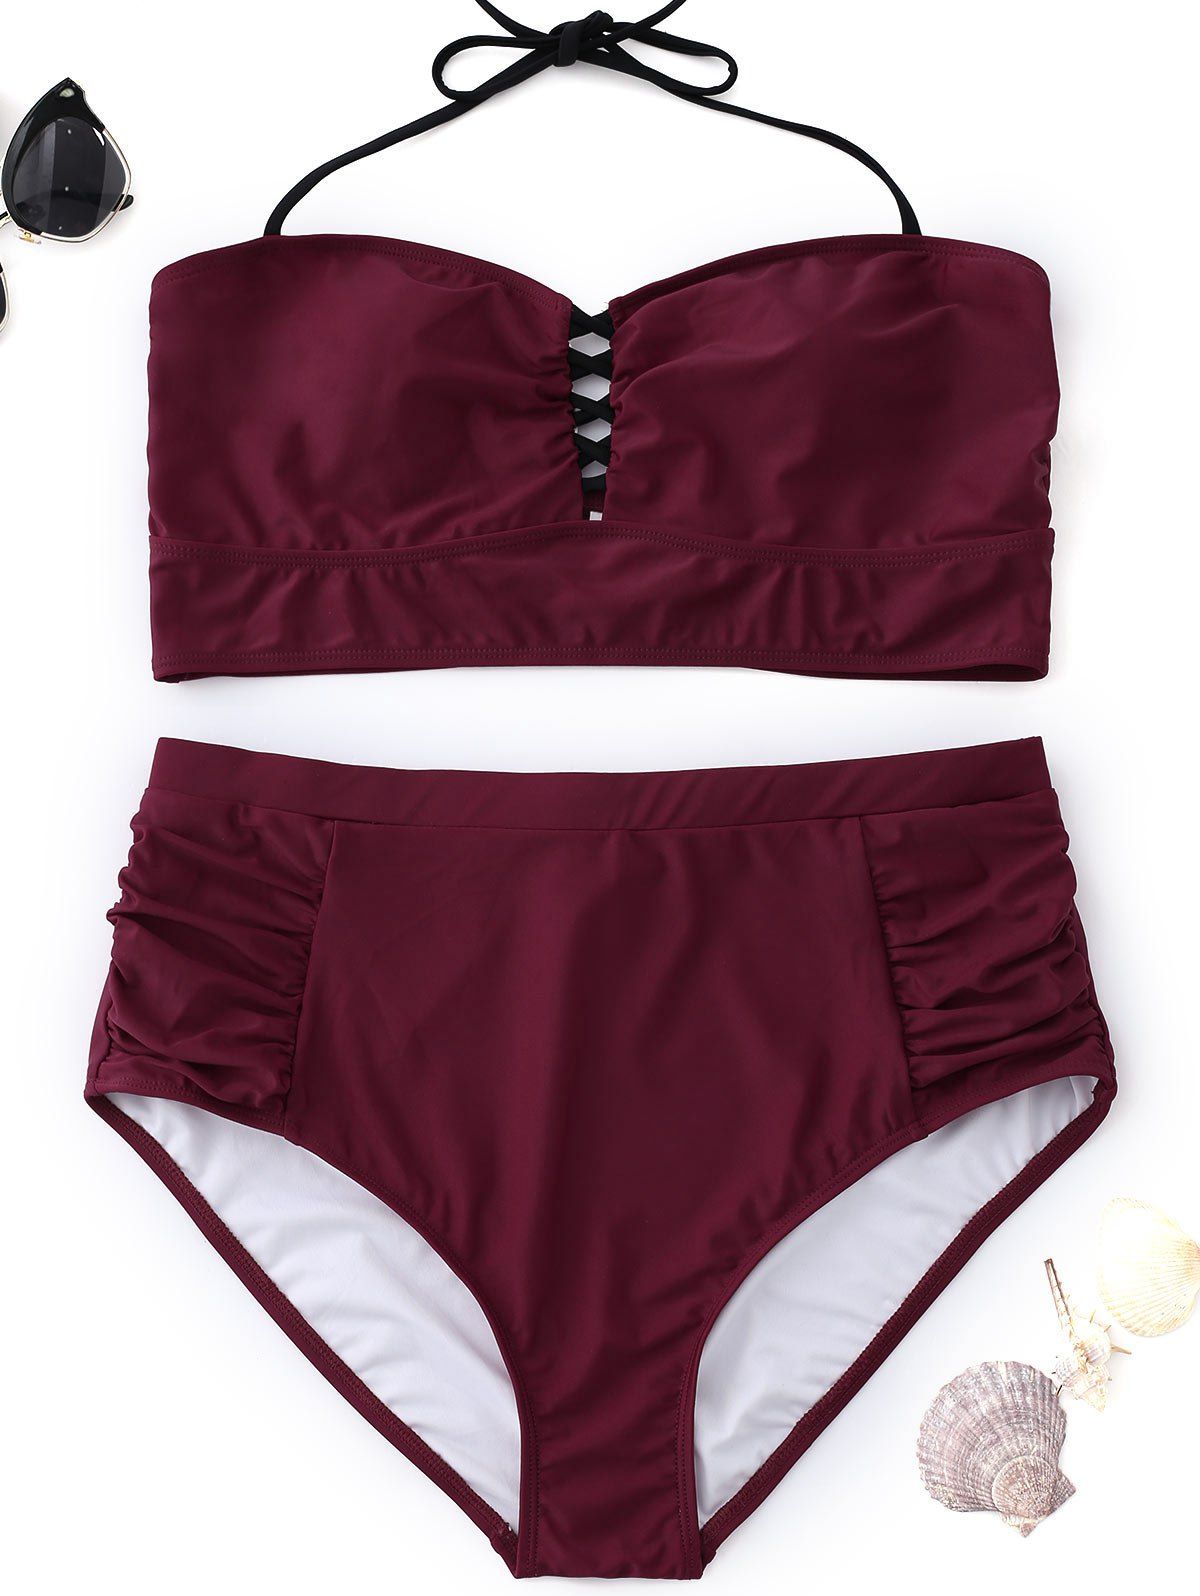 [41% OFF] 2021 Halter High Waisted Plus Size Bikini In WINE RED | DressLily